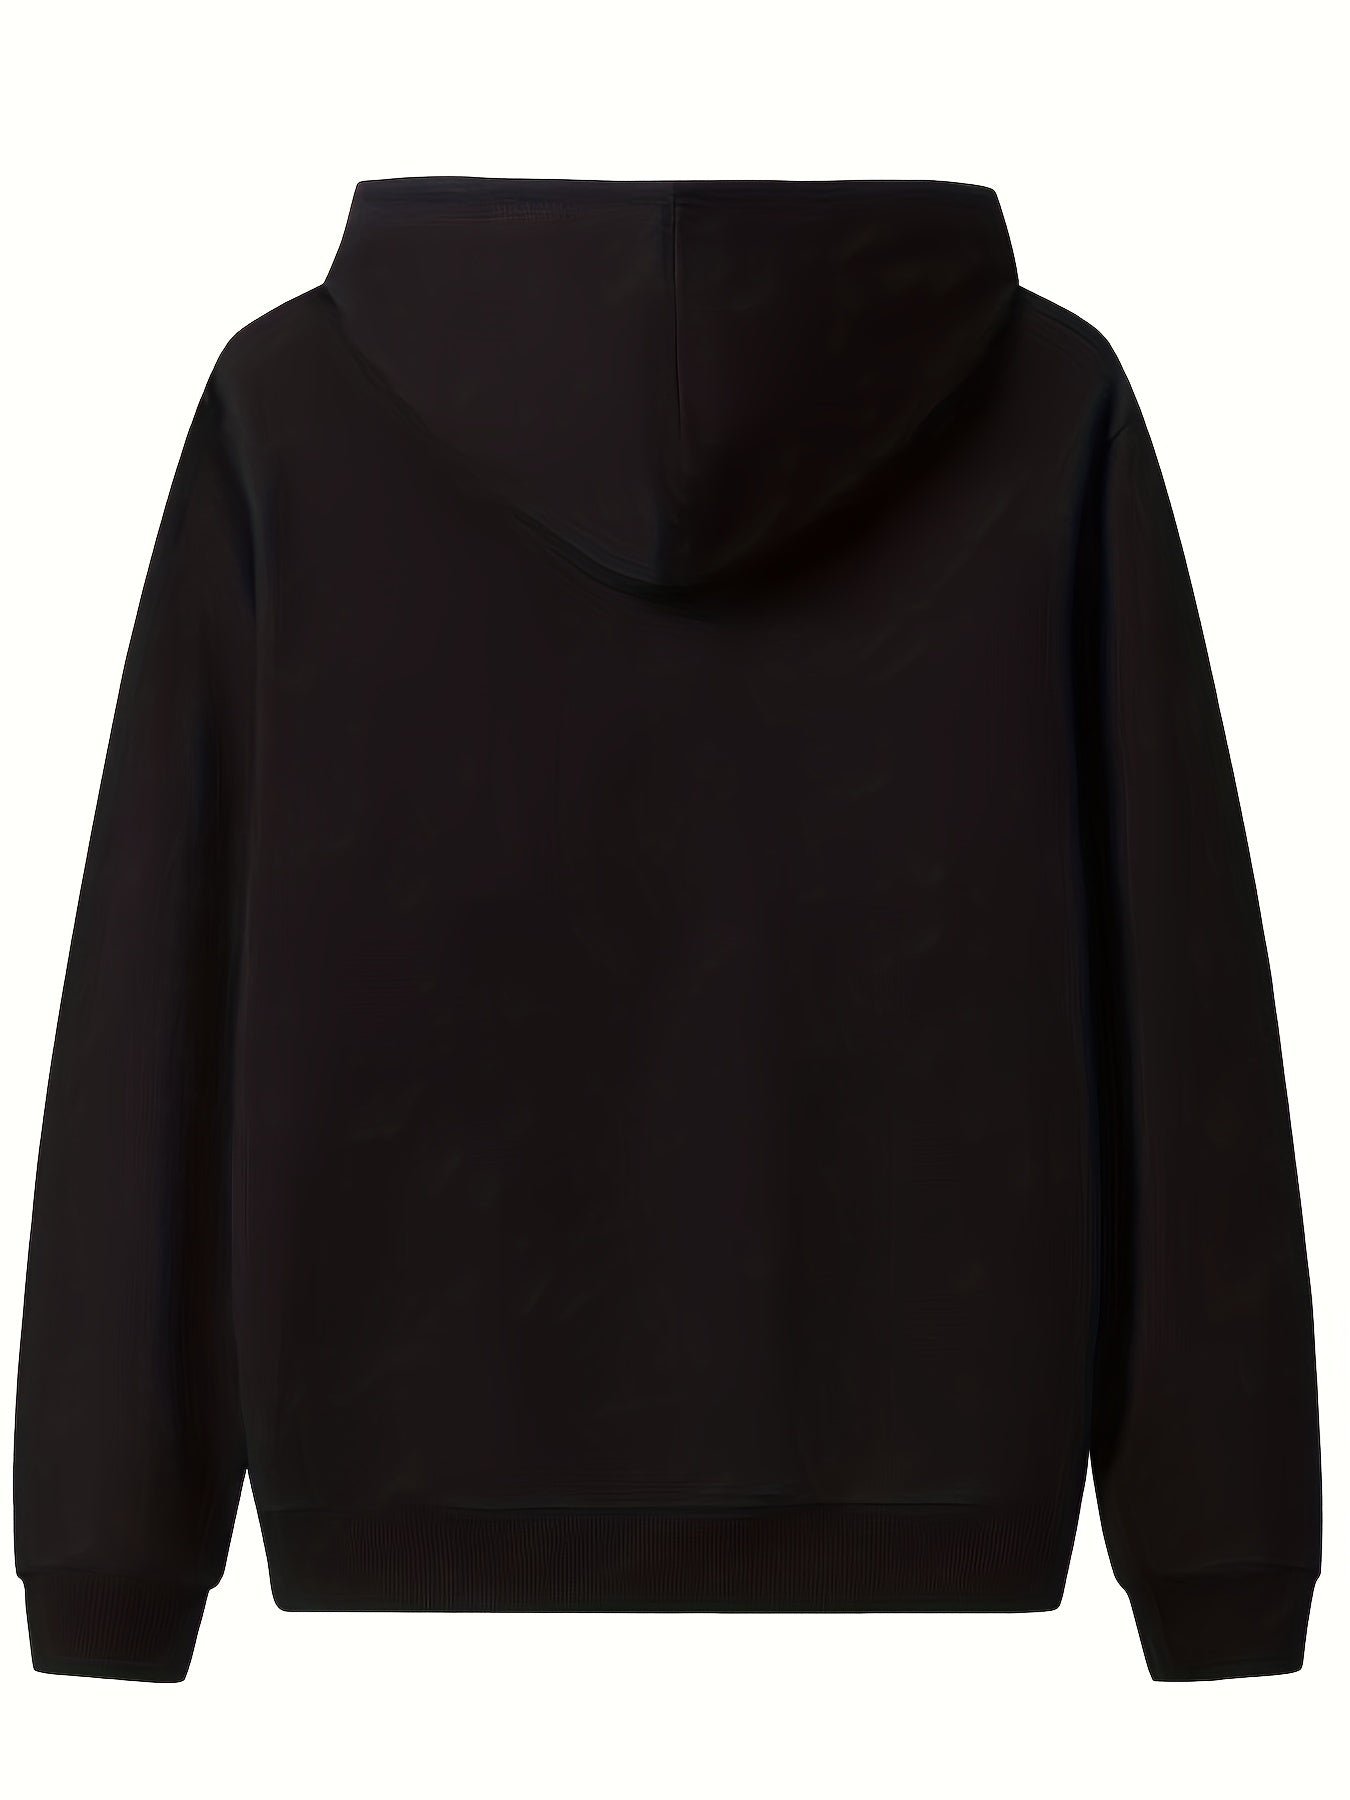 Boys' Hoodie for Spring/Fall: Durable, Easy - Care Fabric, with Comfort Stretch and Casual Style - Perfect for Outdoor Fun - Ammpoure Wellbeing